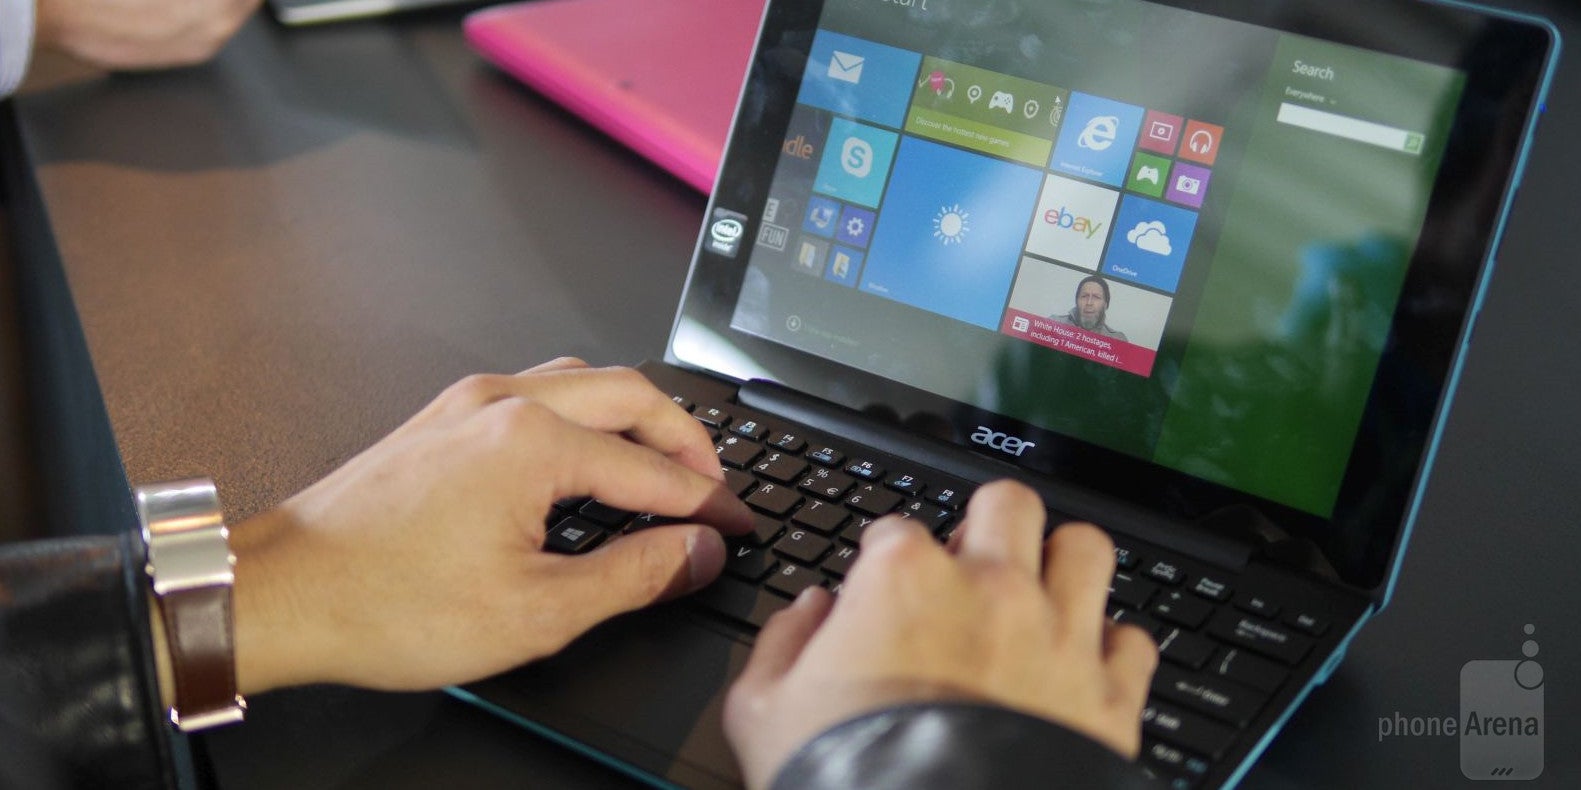 Acer Aspire Switch 10 E hands-on